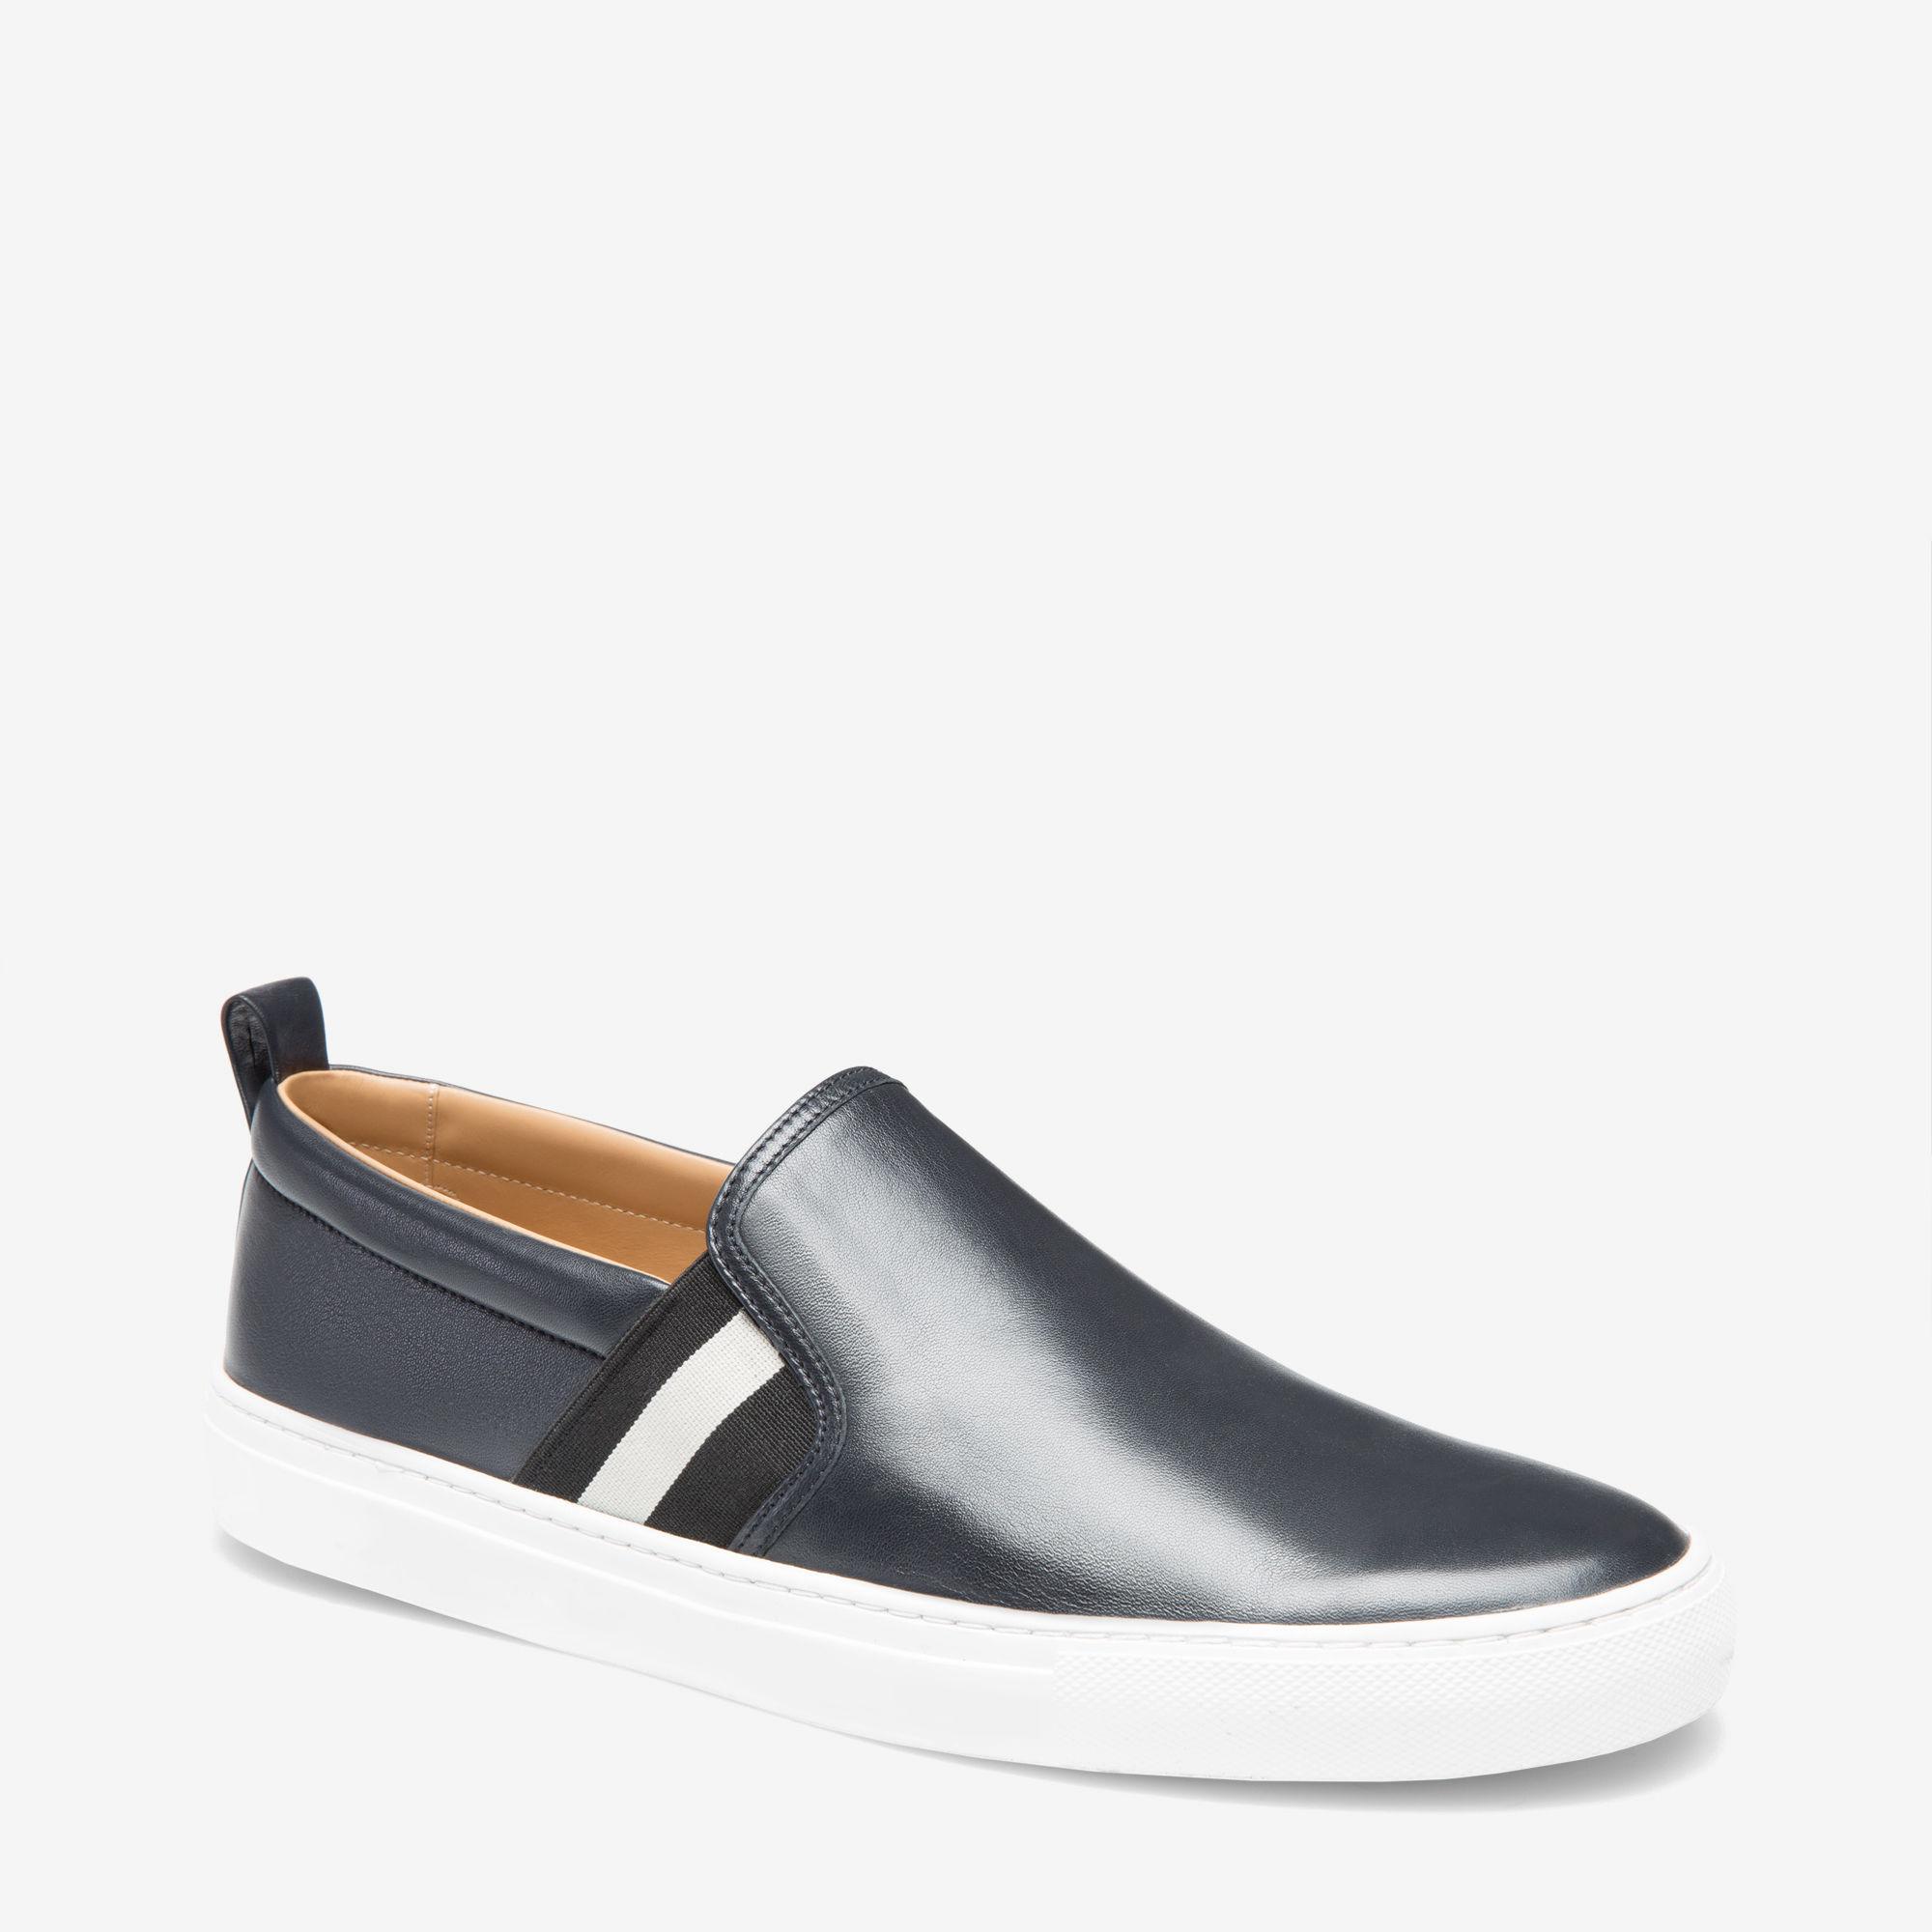 Bally Leather Herald Slip-on Trainers in Blue for Men - Lyst